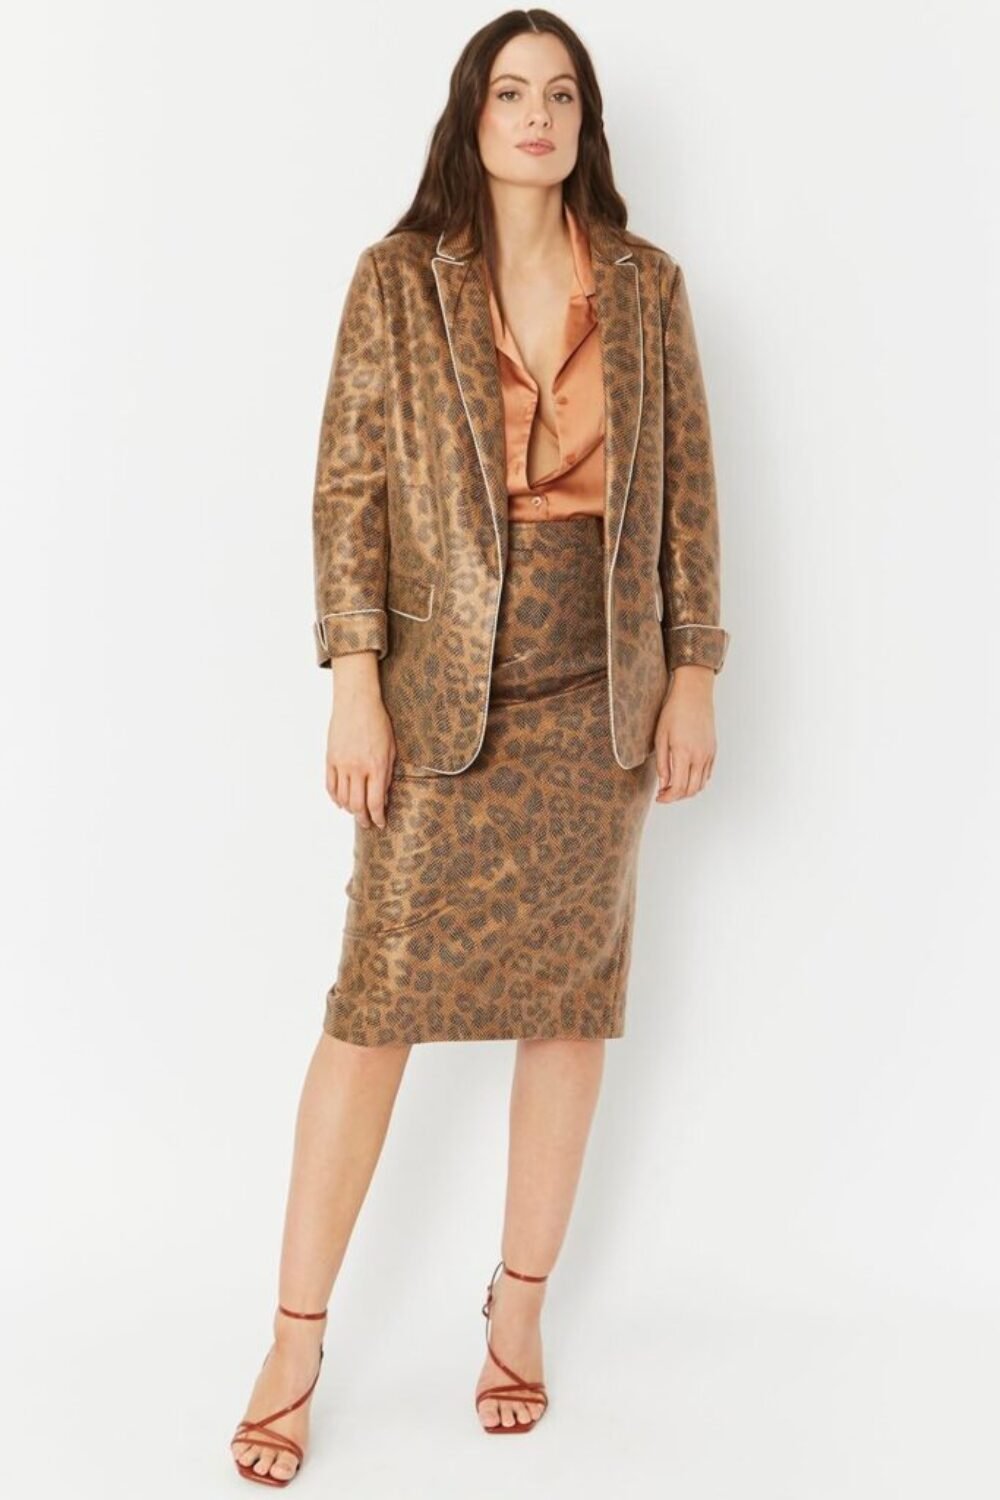 Shop Lux Faux Suede Animal Print Blazer Jacket and women's luxury and designer clothes at www.lux-apparel.co.uk